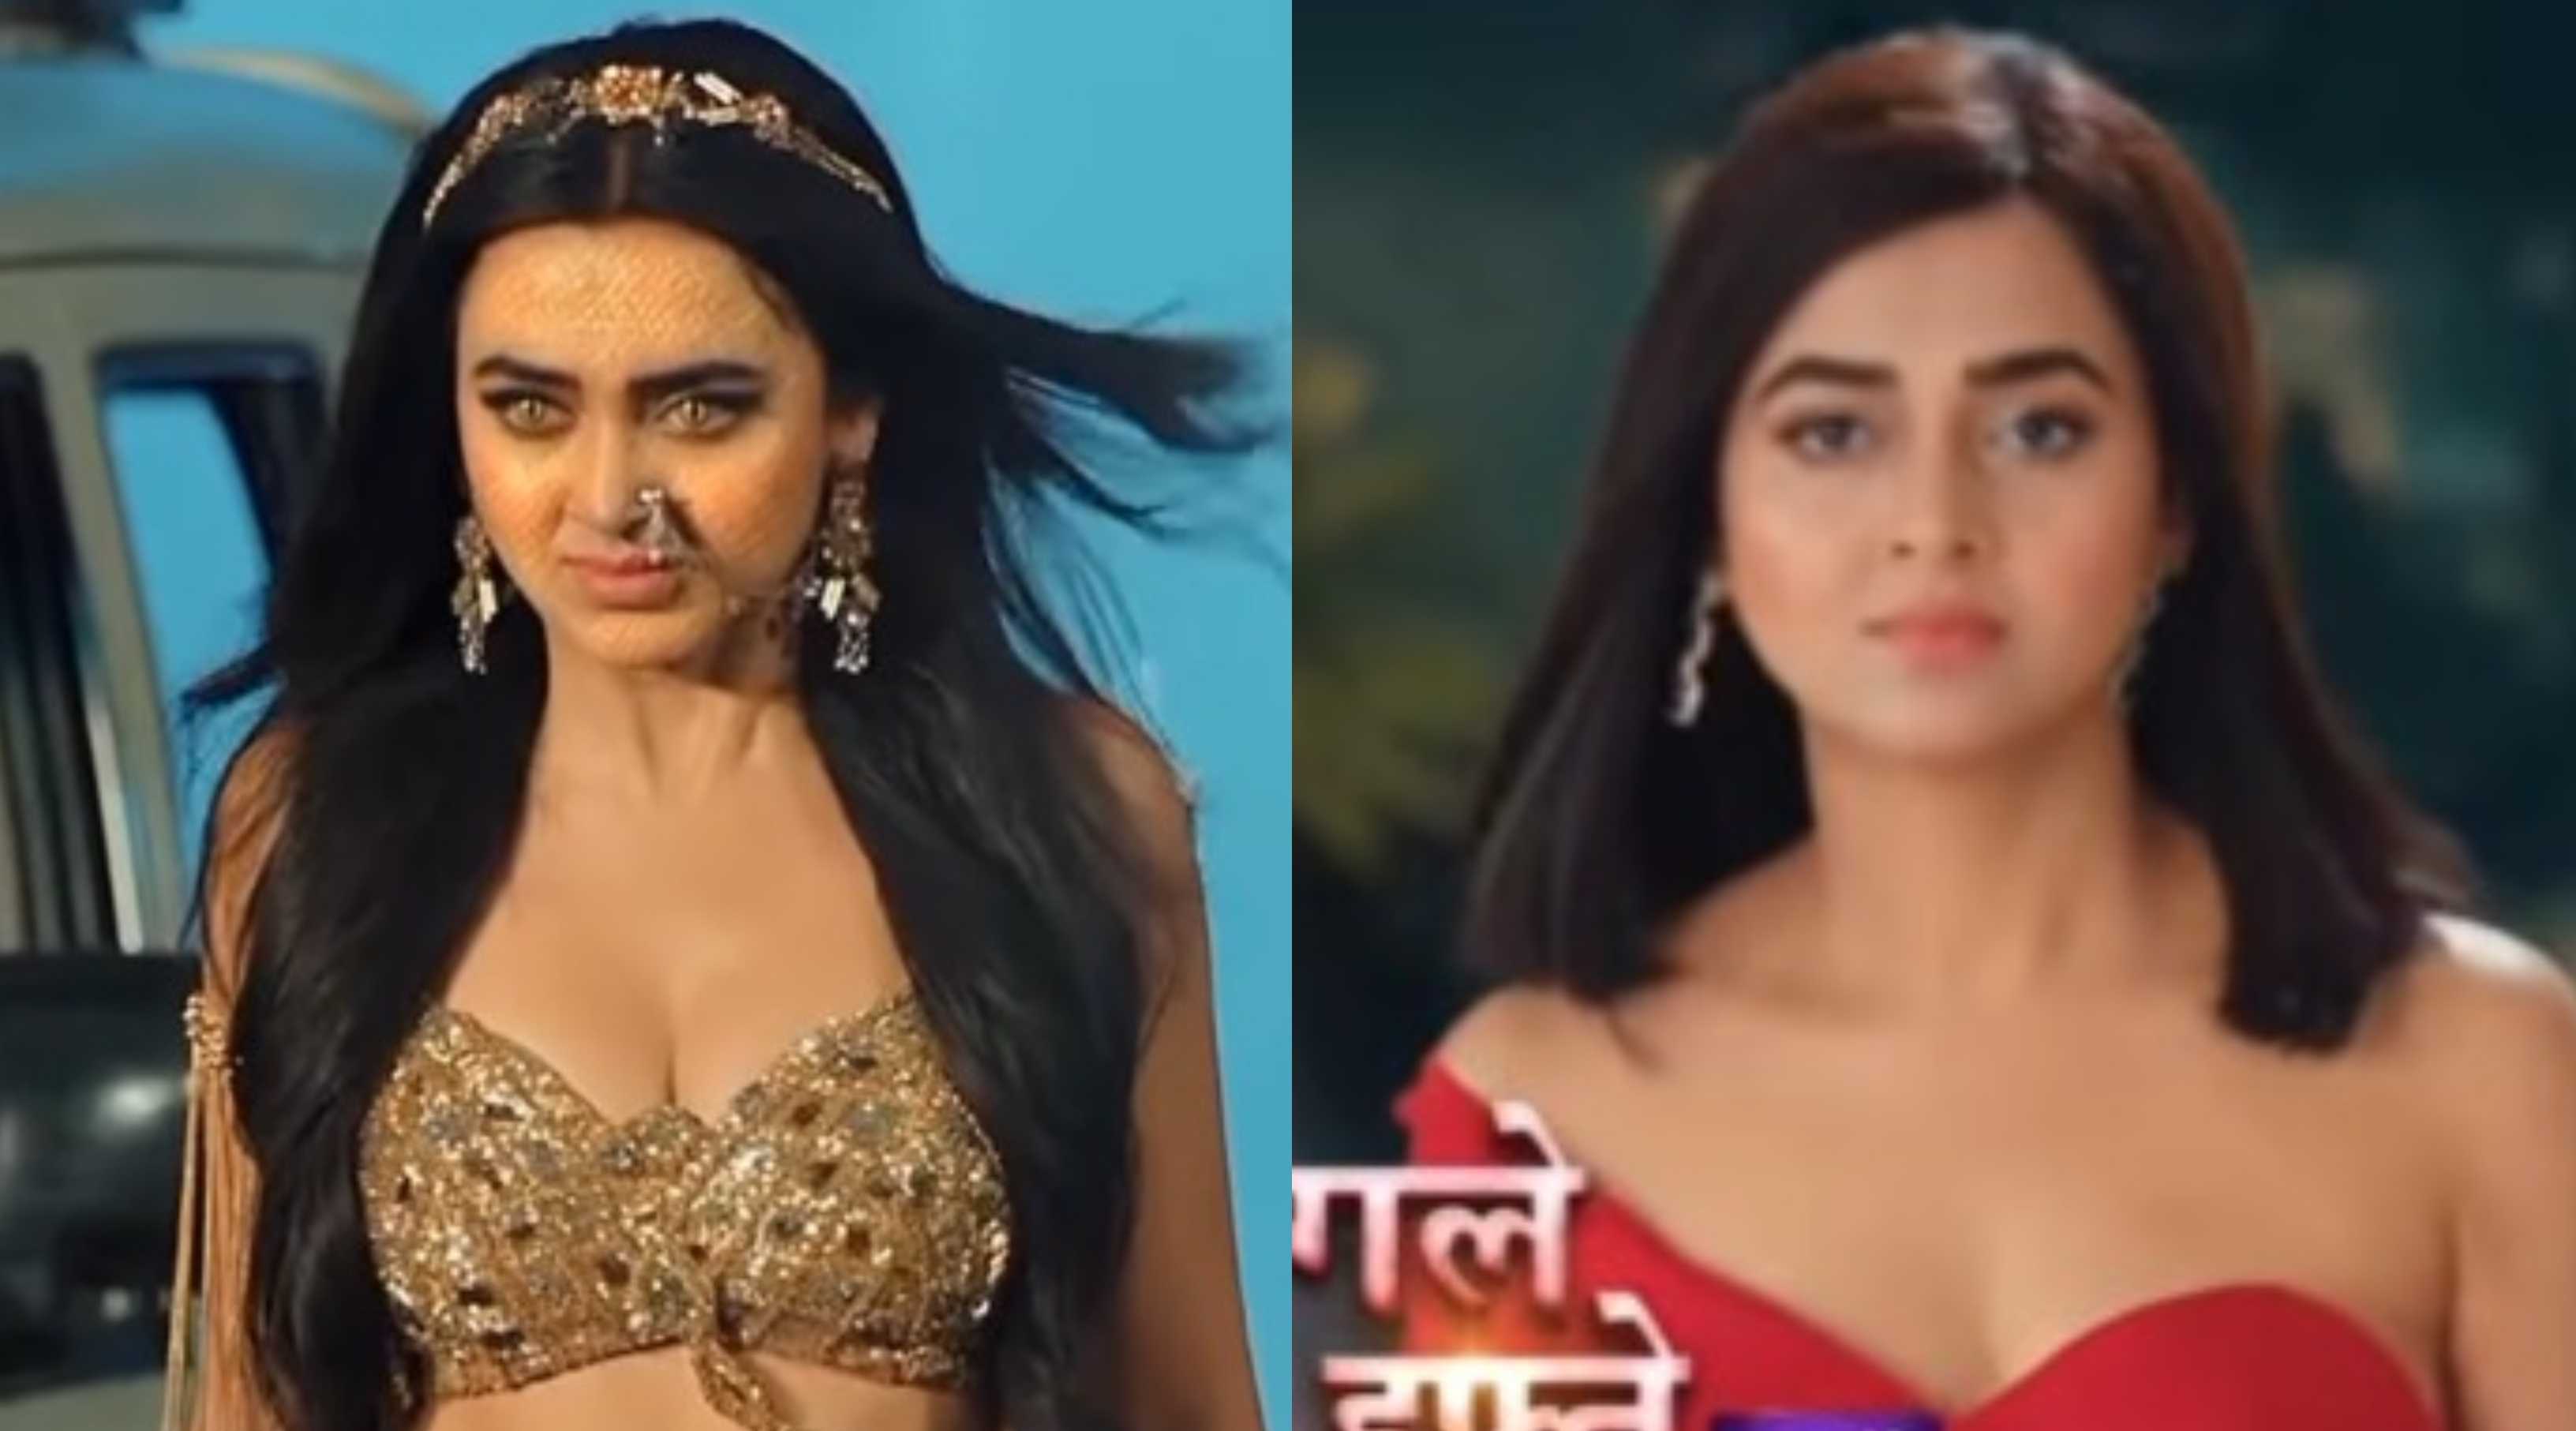 Naagin 6: Tejasswi Prakash becomes Shesh Naagin again, sets out to get her revenge in a red hot avatar; watch